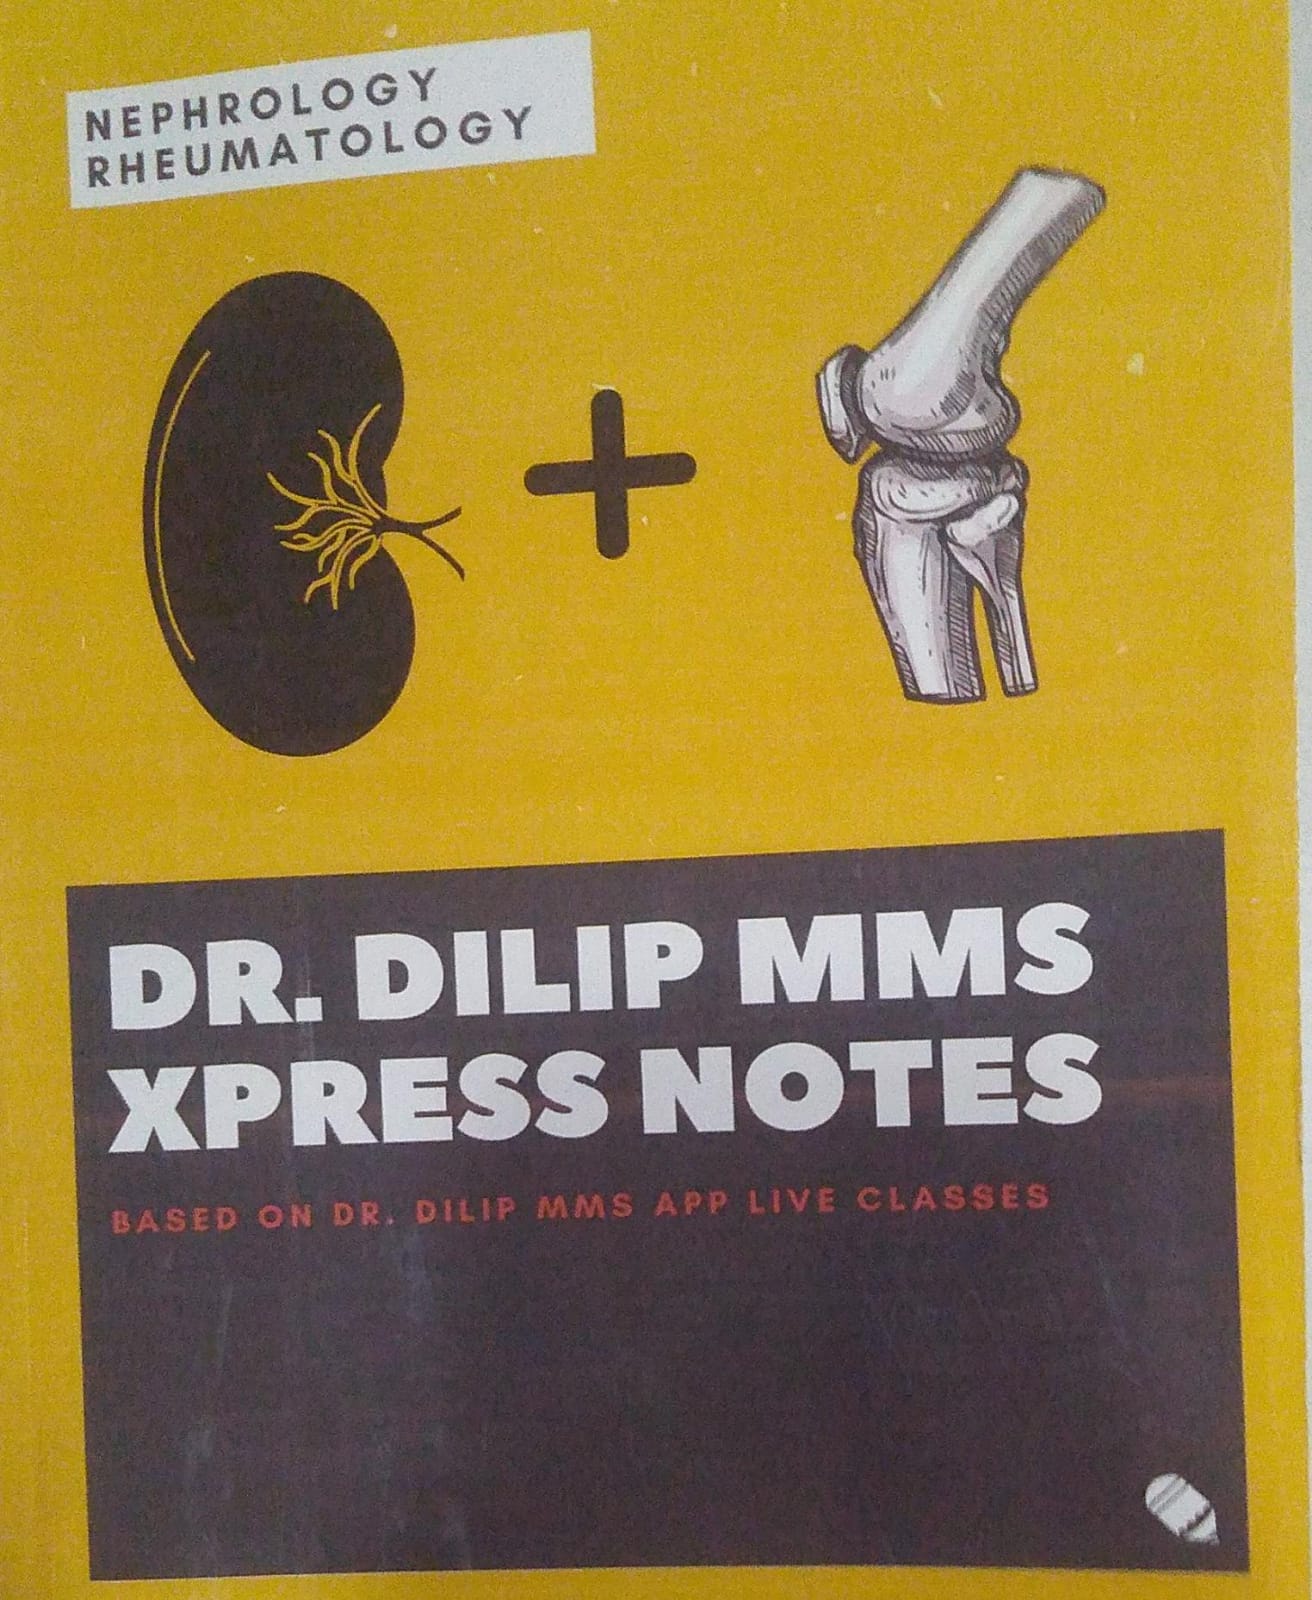 dr. dilip mms xpress notes